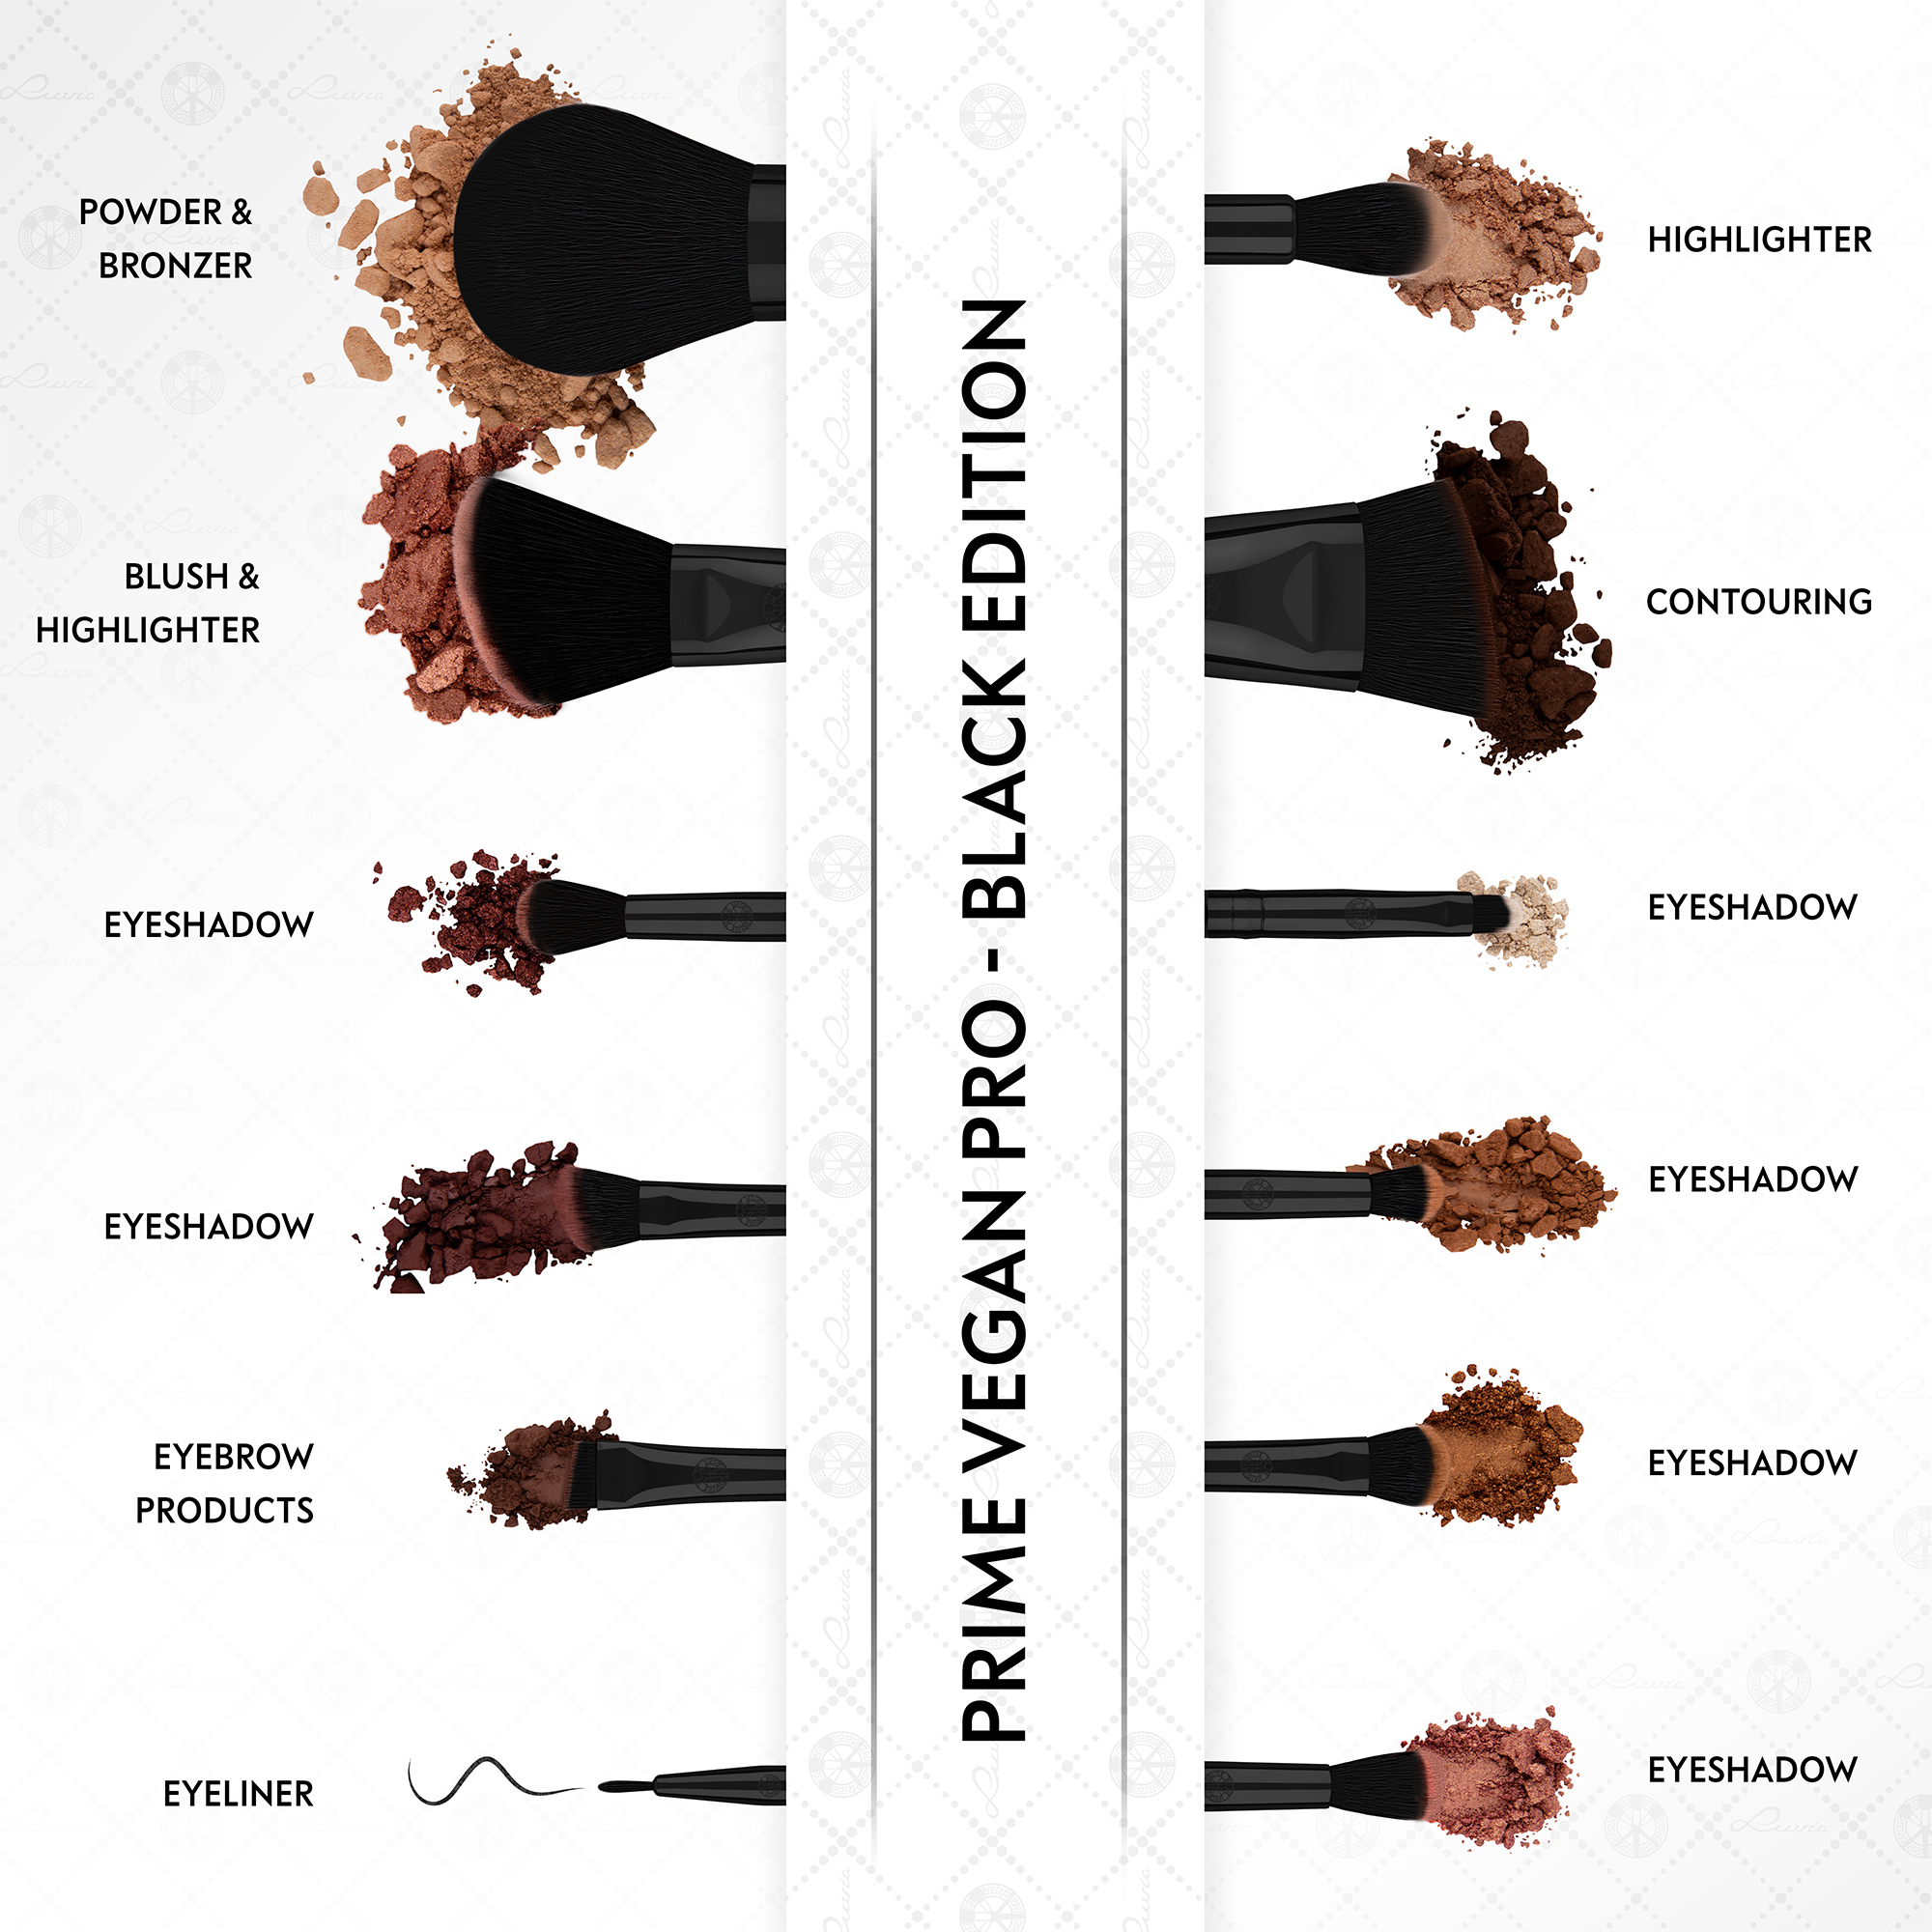 Description of the brushes